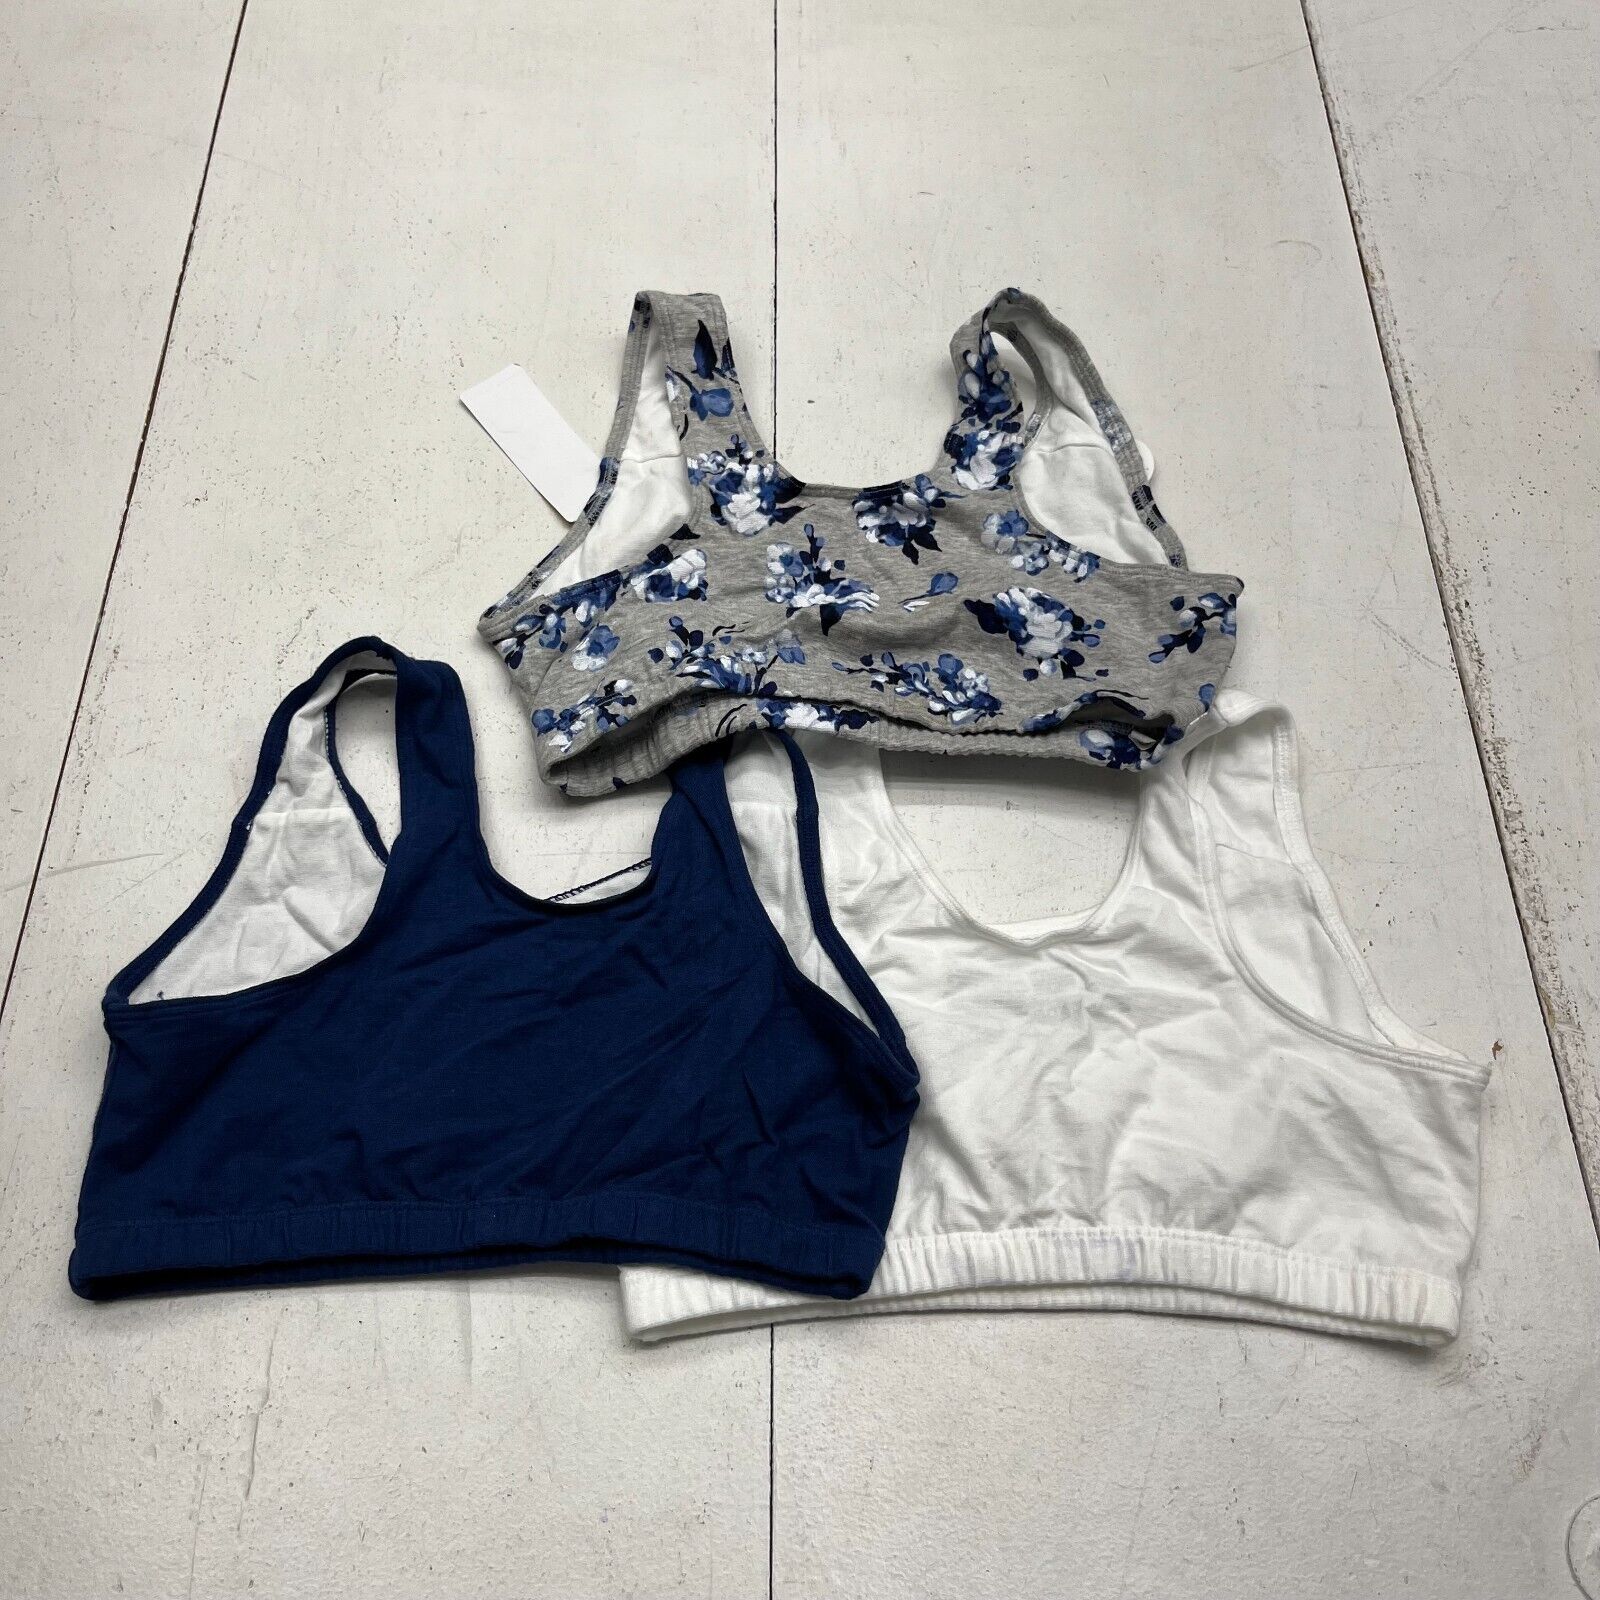 Fruit Of The Loom Assorted Floral Print 3 Pack Sports Bras Women's